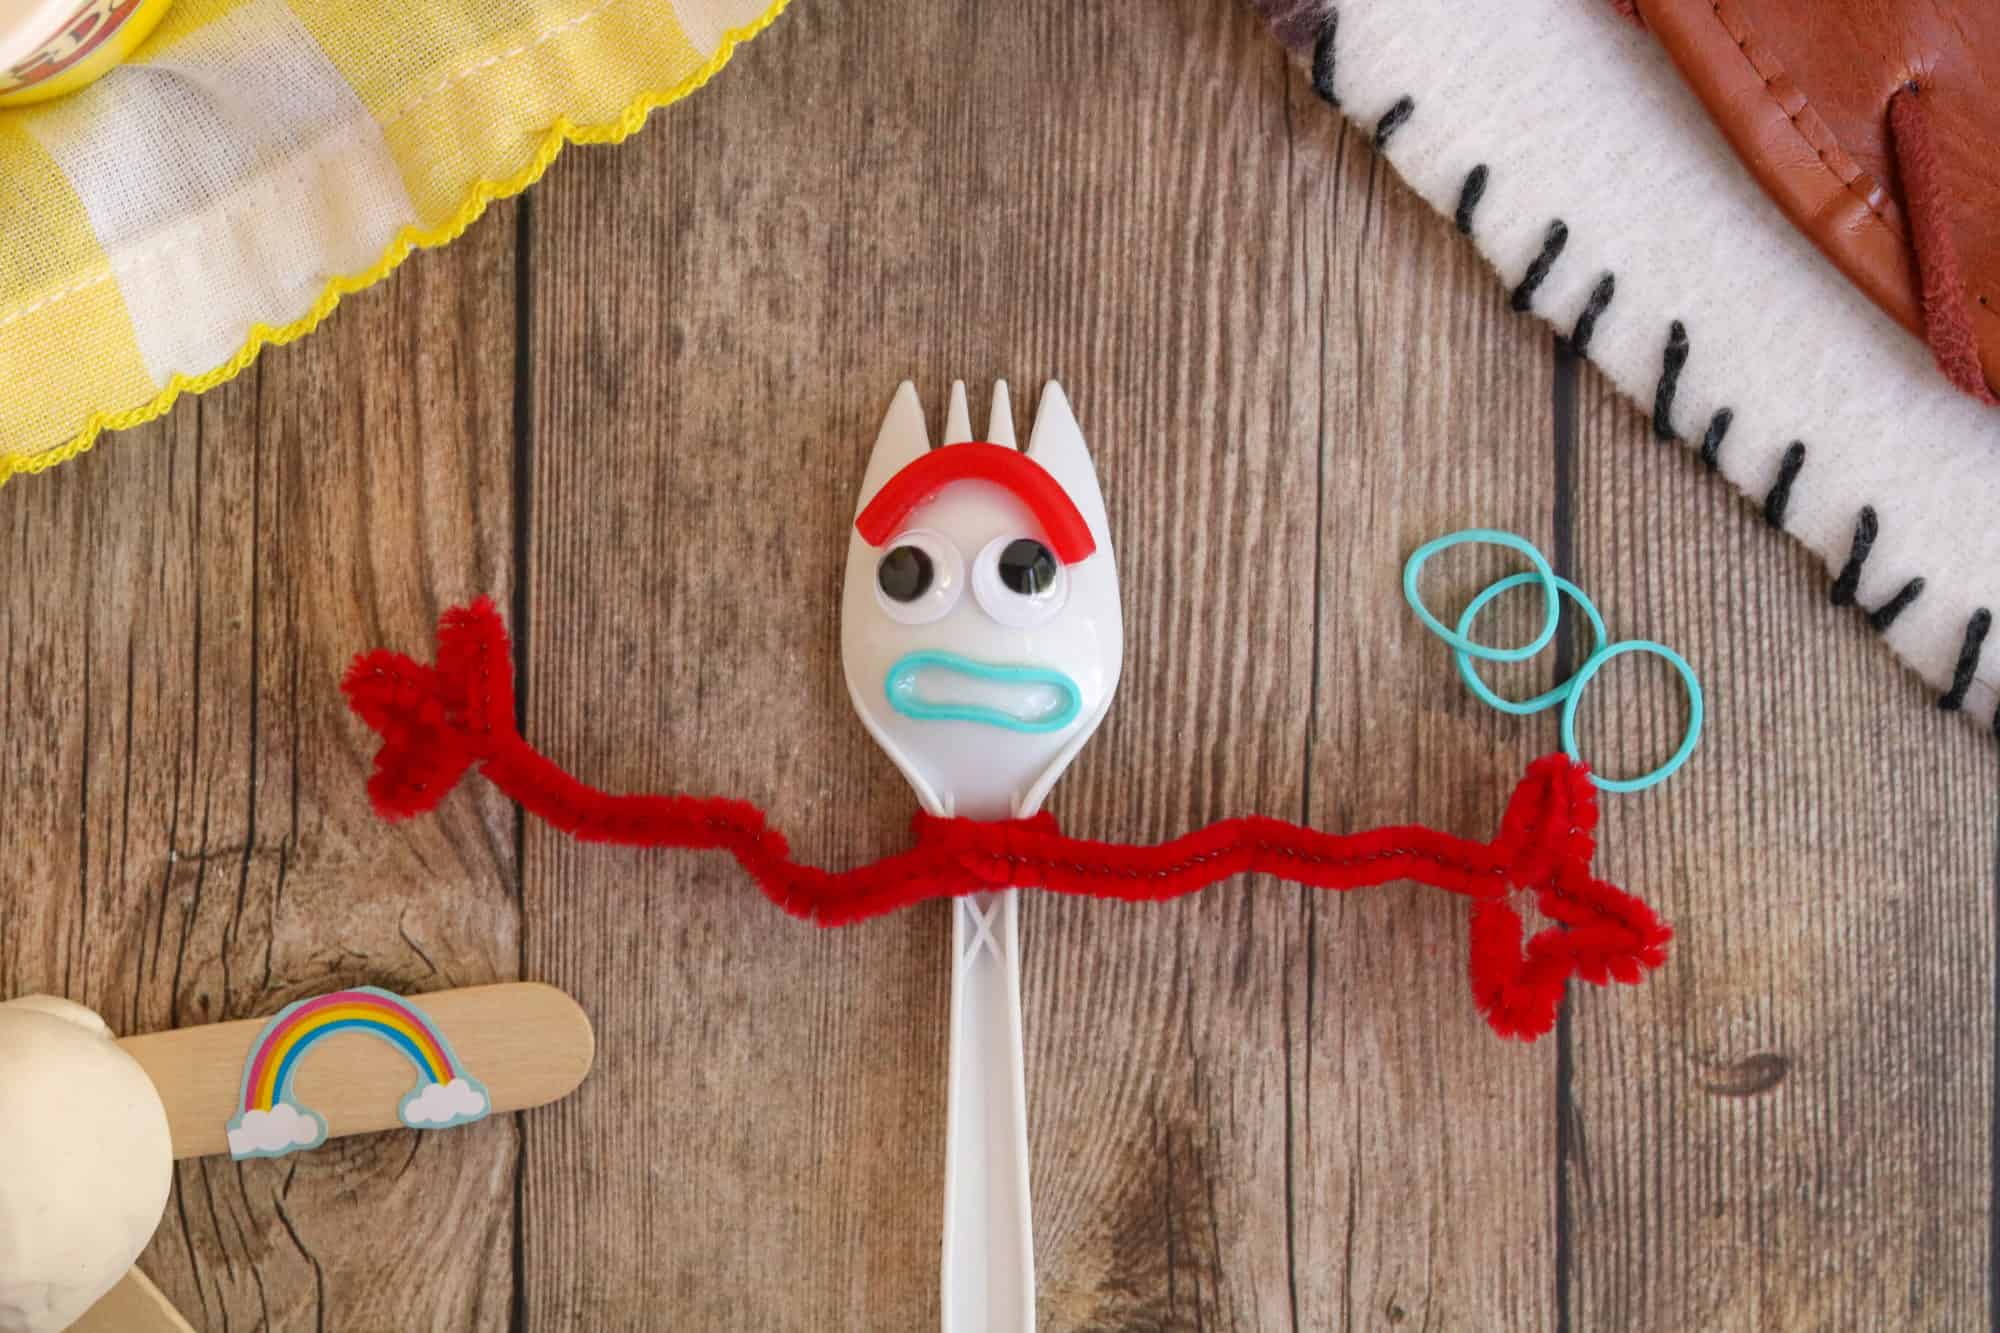 How To Make Your Own Forky Inspired by Toy Story 4